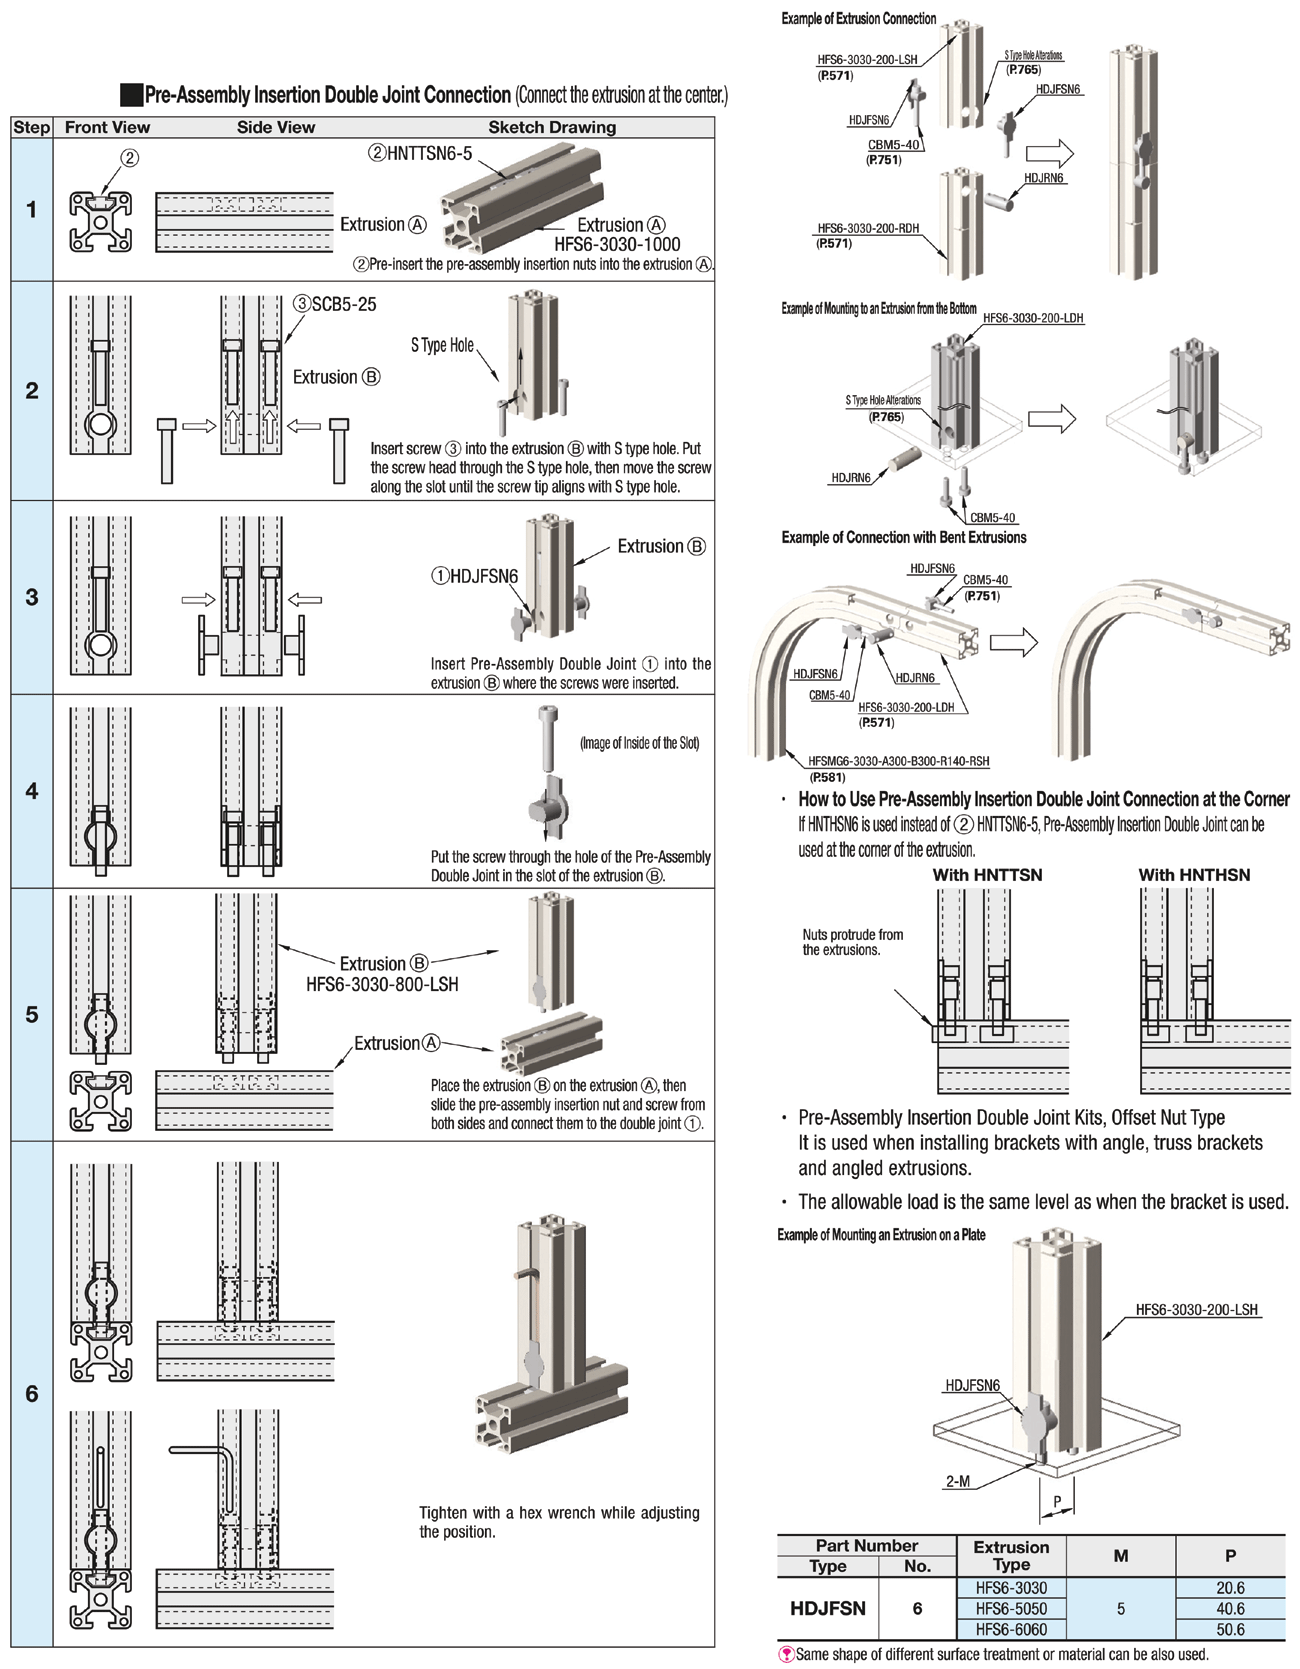 Aluminum Extrusions - with Double Joints pre-Assembled:Related Image